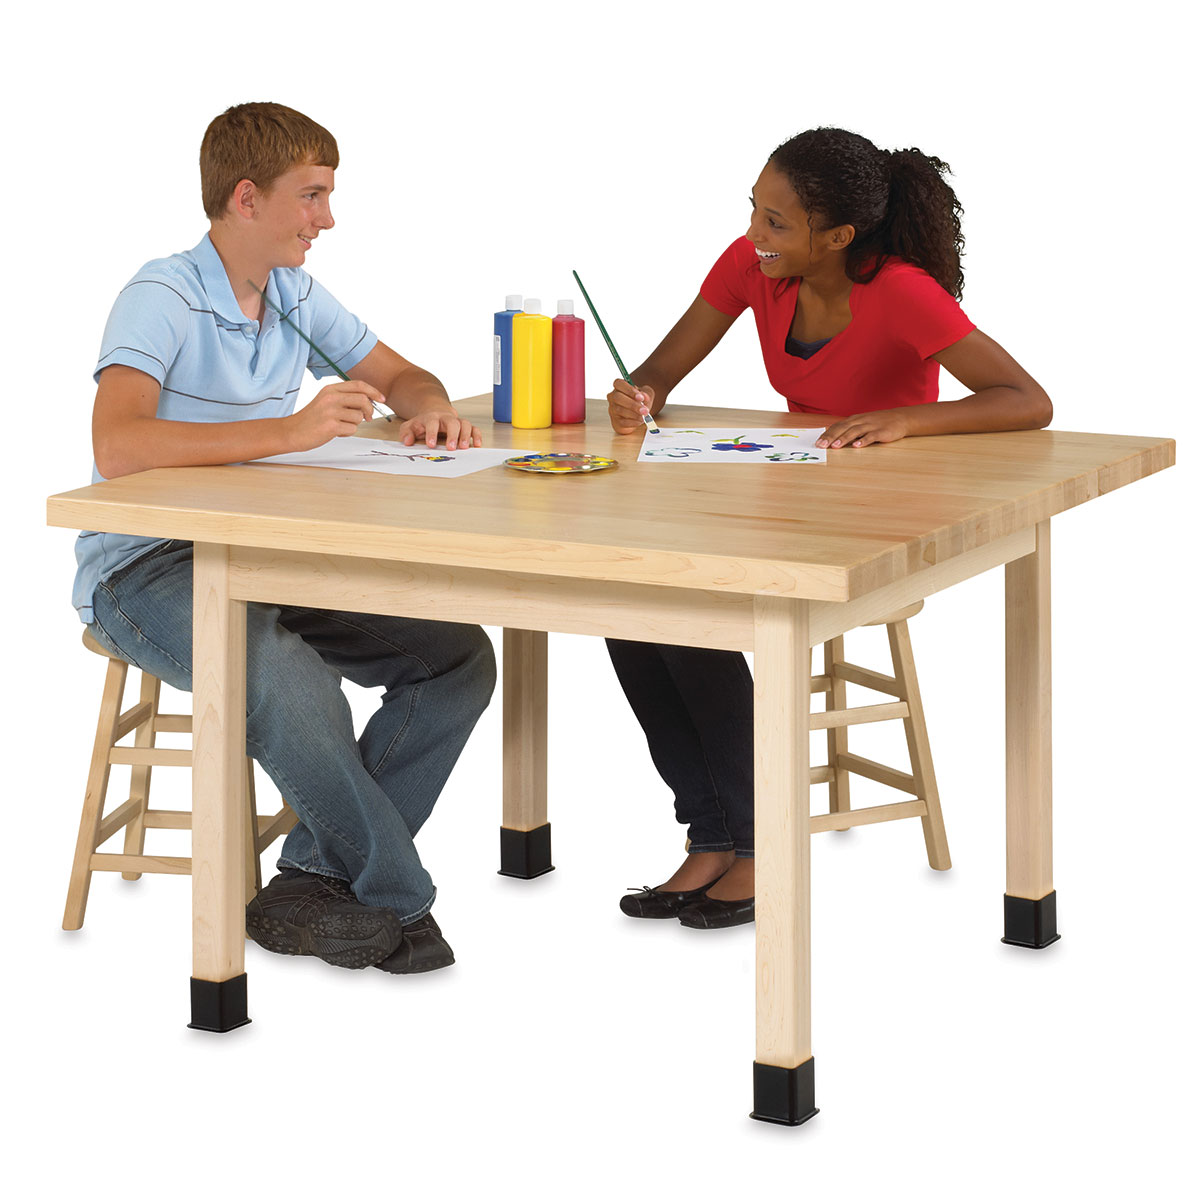 Diversified Spaces Four-Student Table - Maple Top, Standard Height